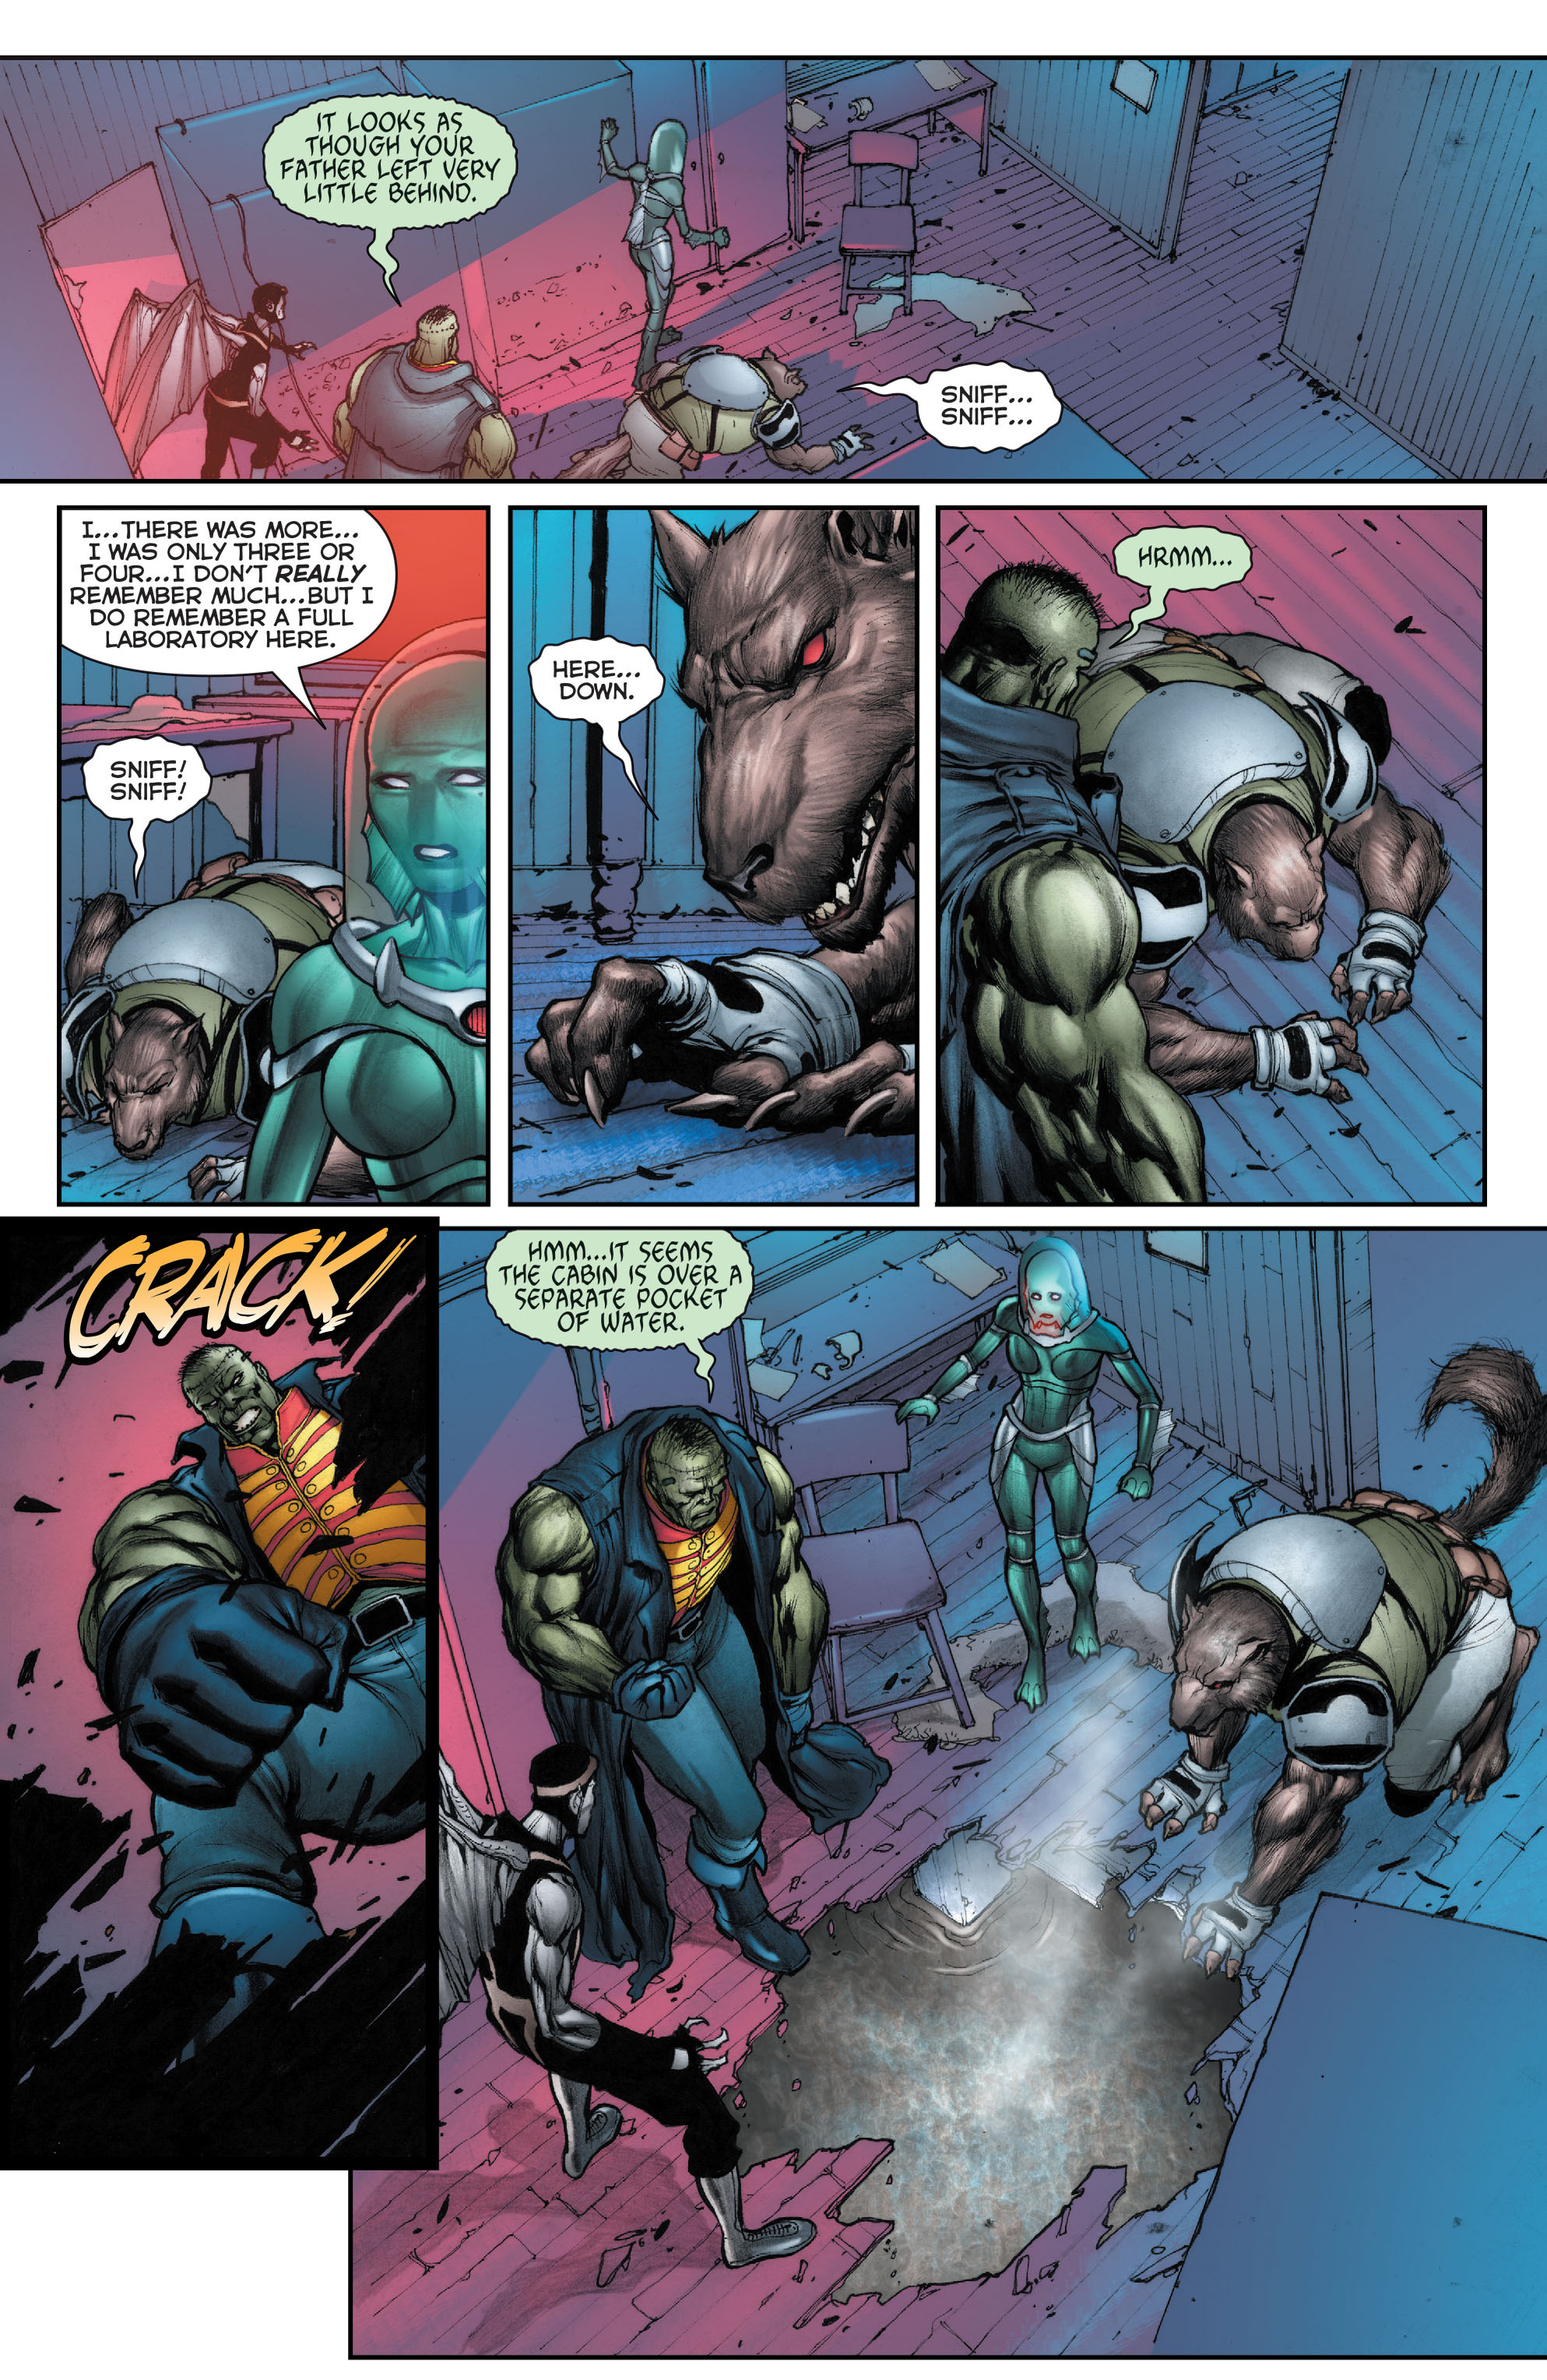 Flashpoint: The World of Flashpoint Featuring Green Lantern Full #1 - English 91